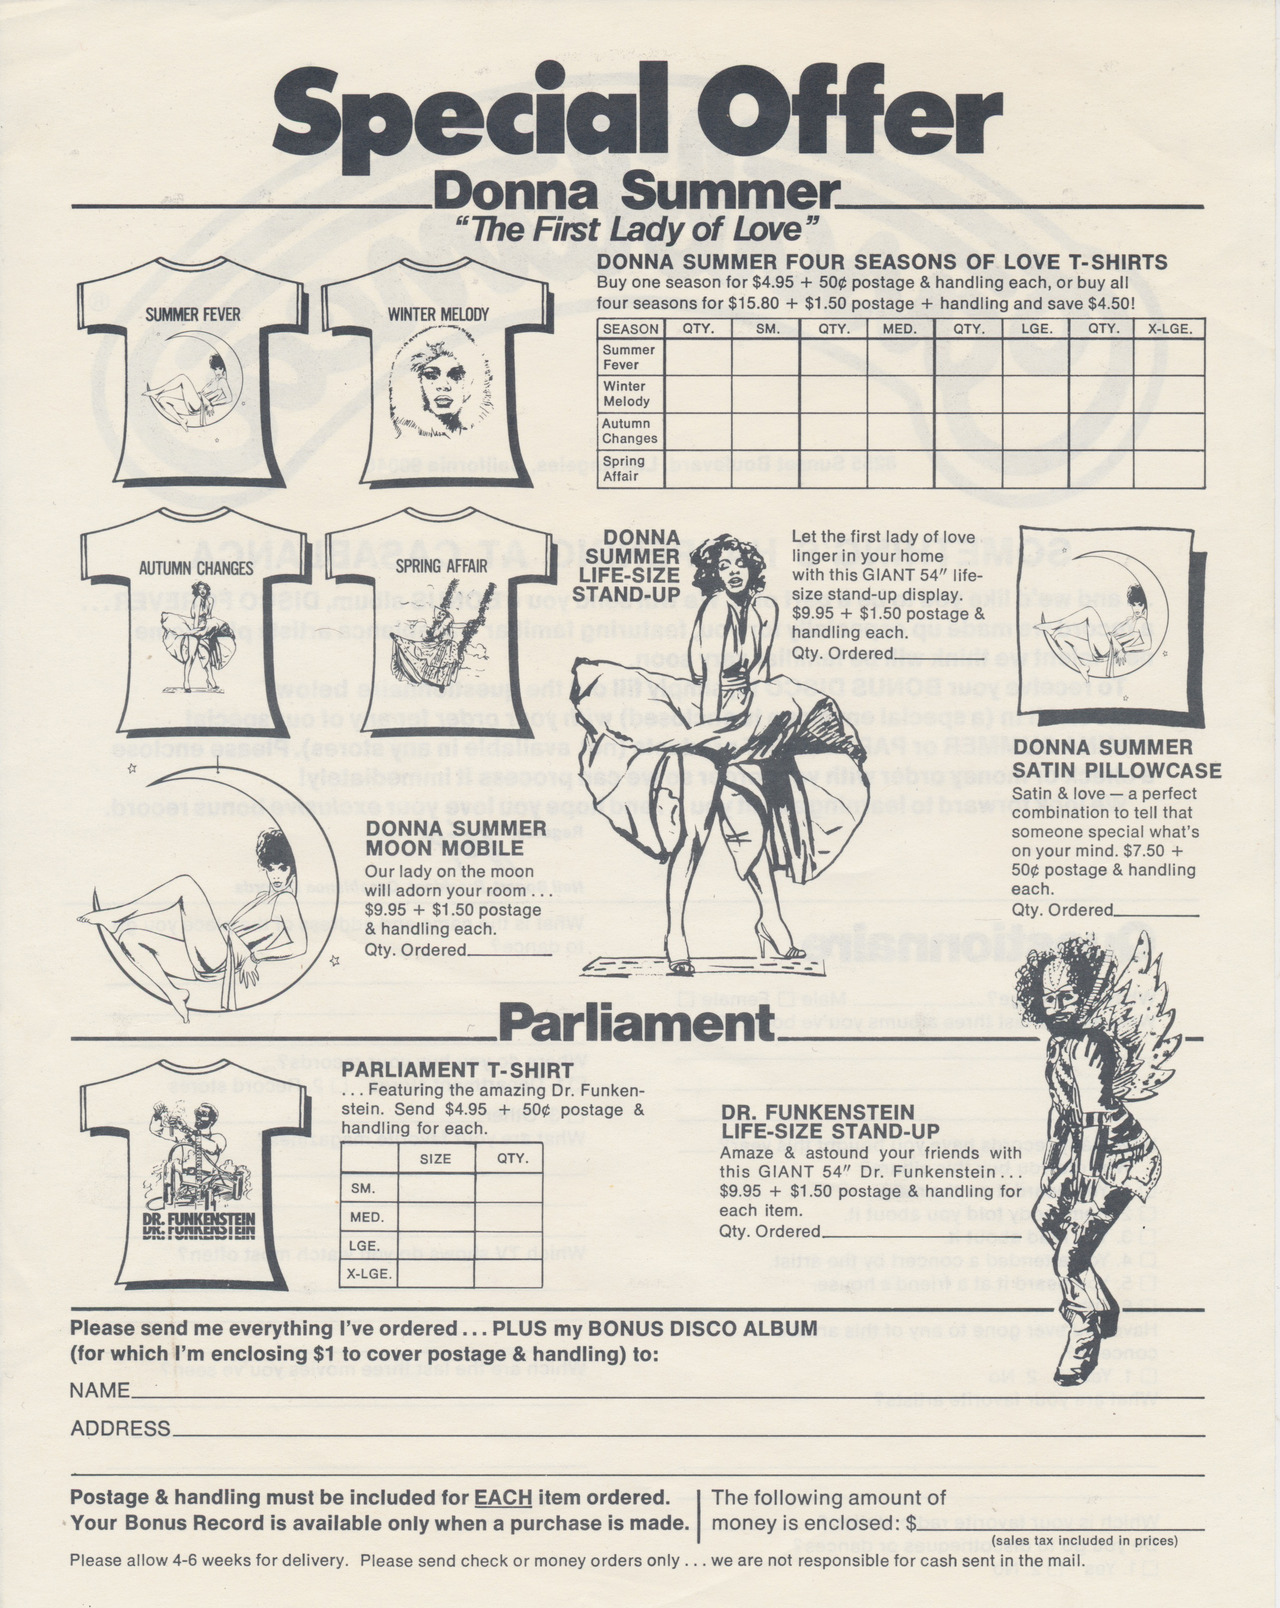 An order form for Donna Summer and Parliament merch issued by Casablanca Records in 1976. Found inside an old copy of Clones of Dr. Funkenstein by Parliament. I would kill for either/both of these Parliament items.